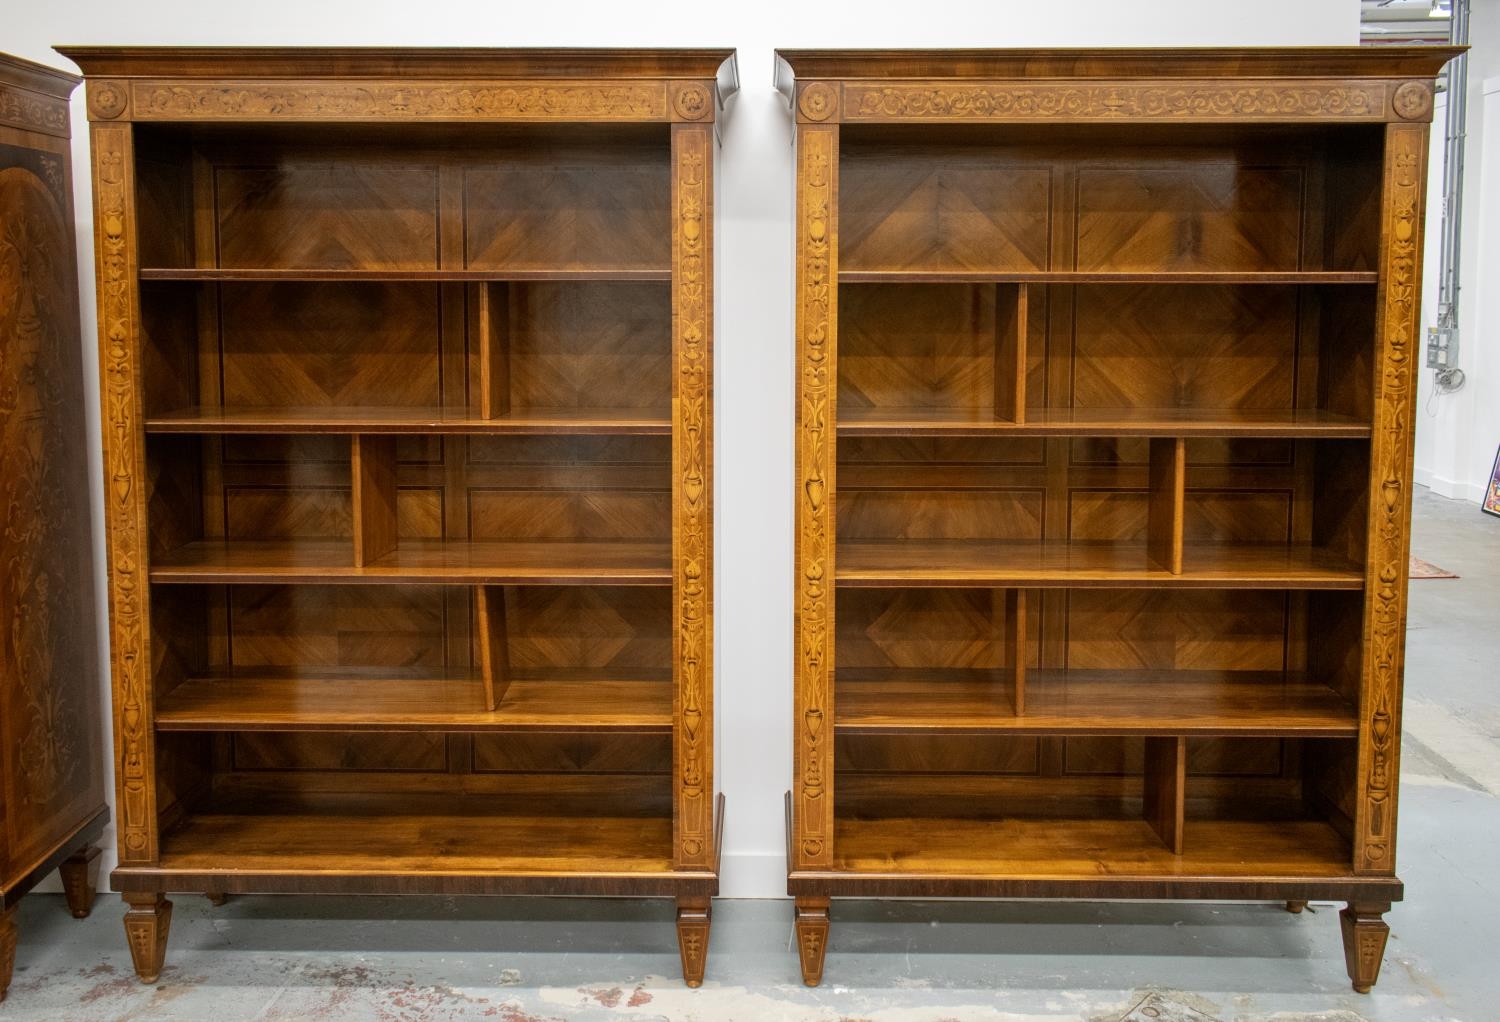 OPEN BOOKCASES, a pair, Italian walnut and marquetry with removable shelves and dividers, 212cm H